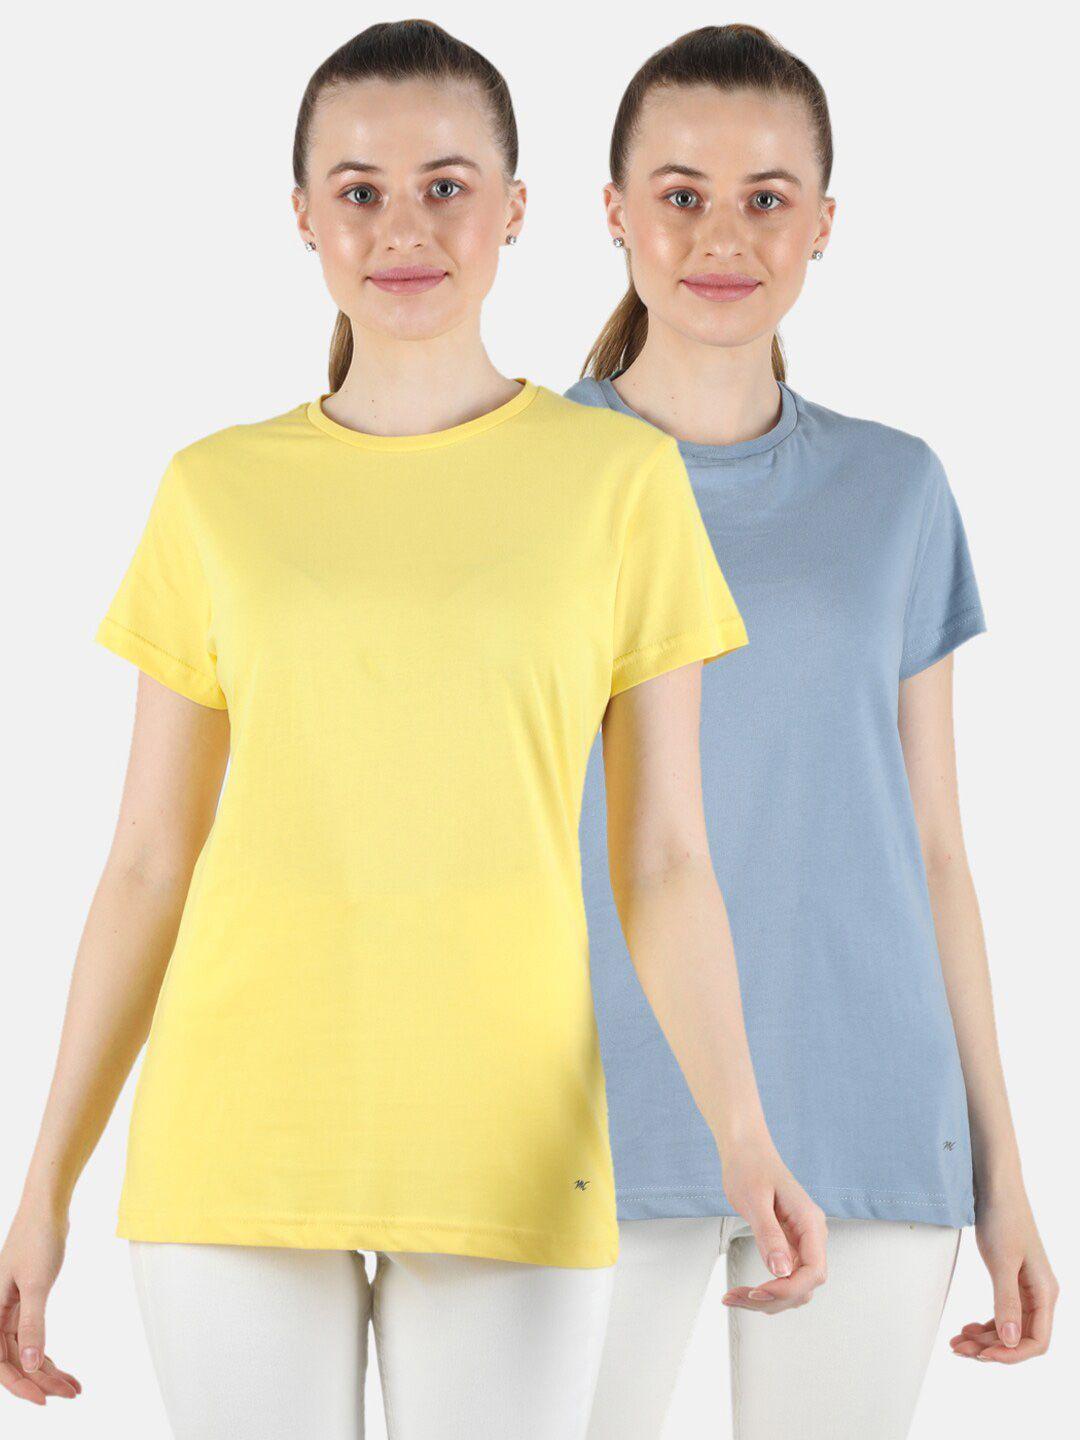 monte-carlo-set-of-2-solid-yellow-&-grey-tops